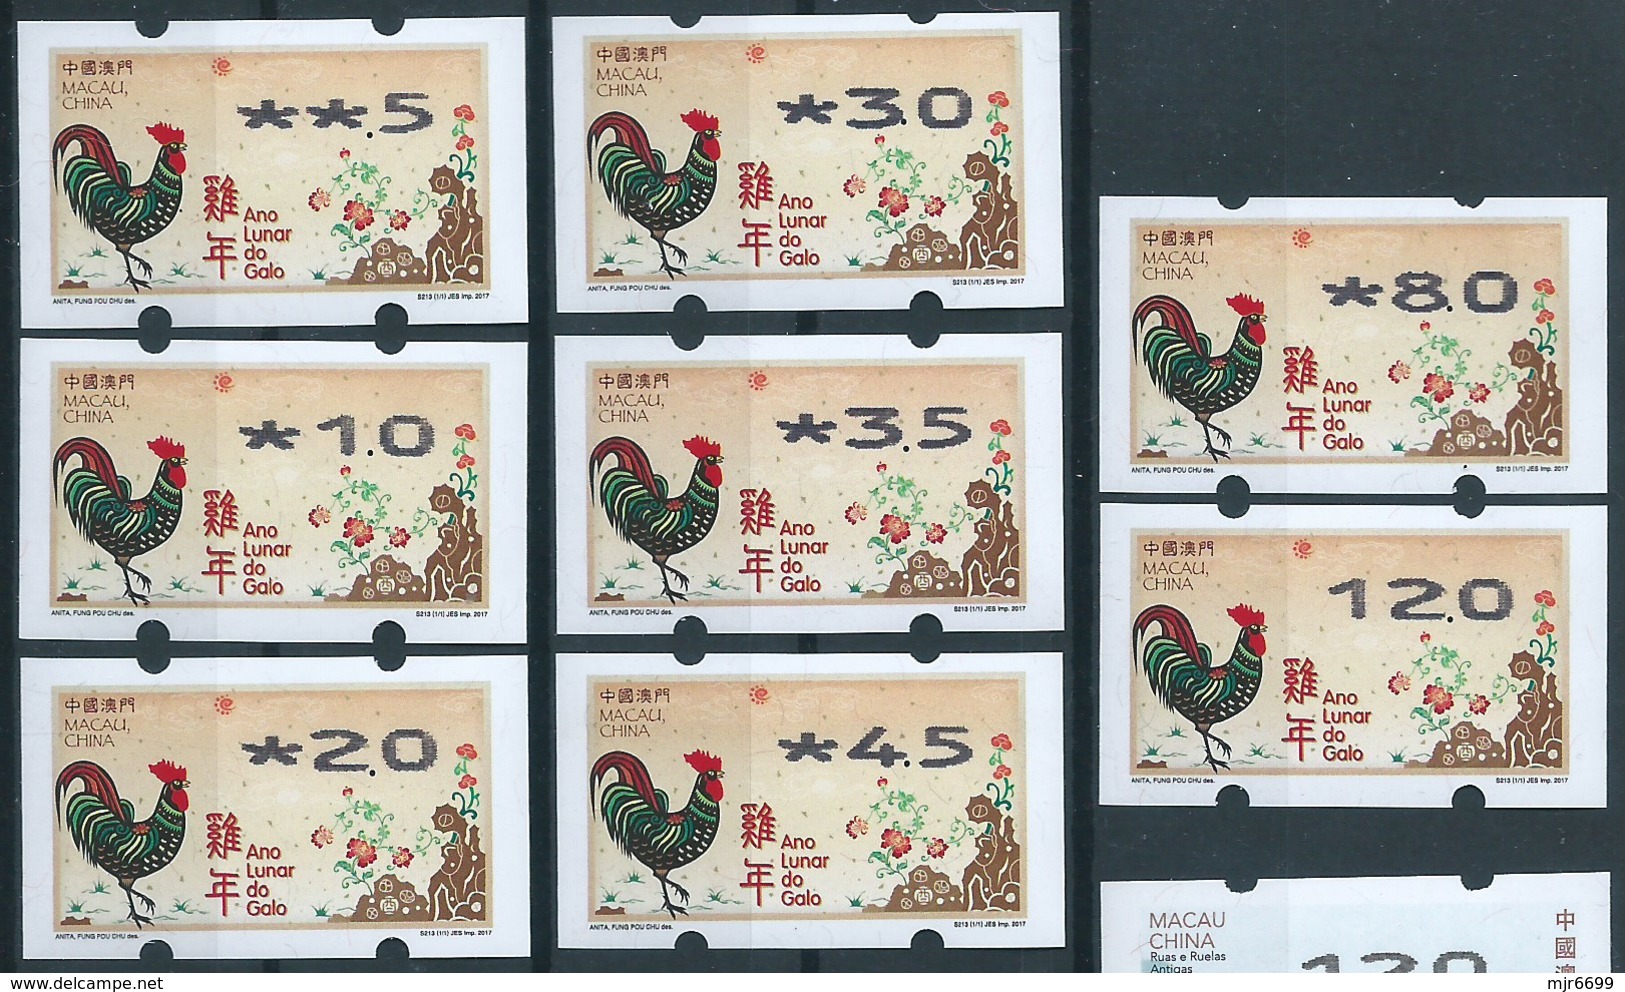 MACAU 2017 ZODIAC YEAR OF THE ROOSTER ATM LABELS NAGLER SET OF 8 - Distributors